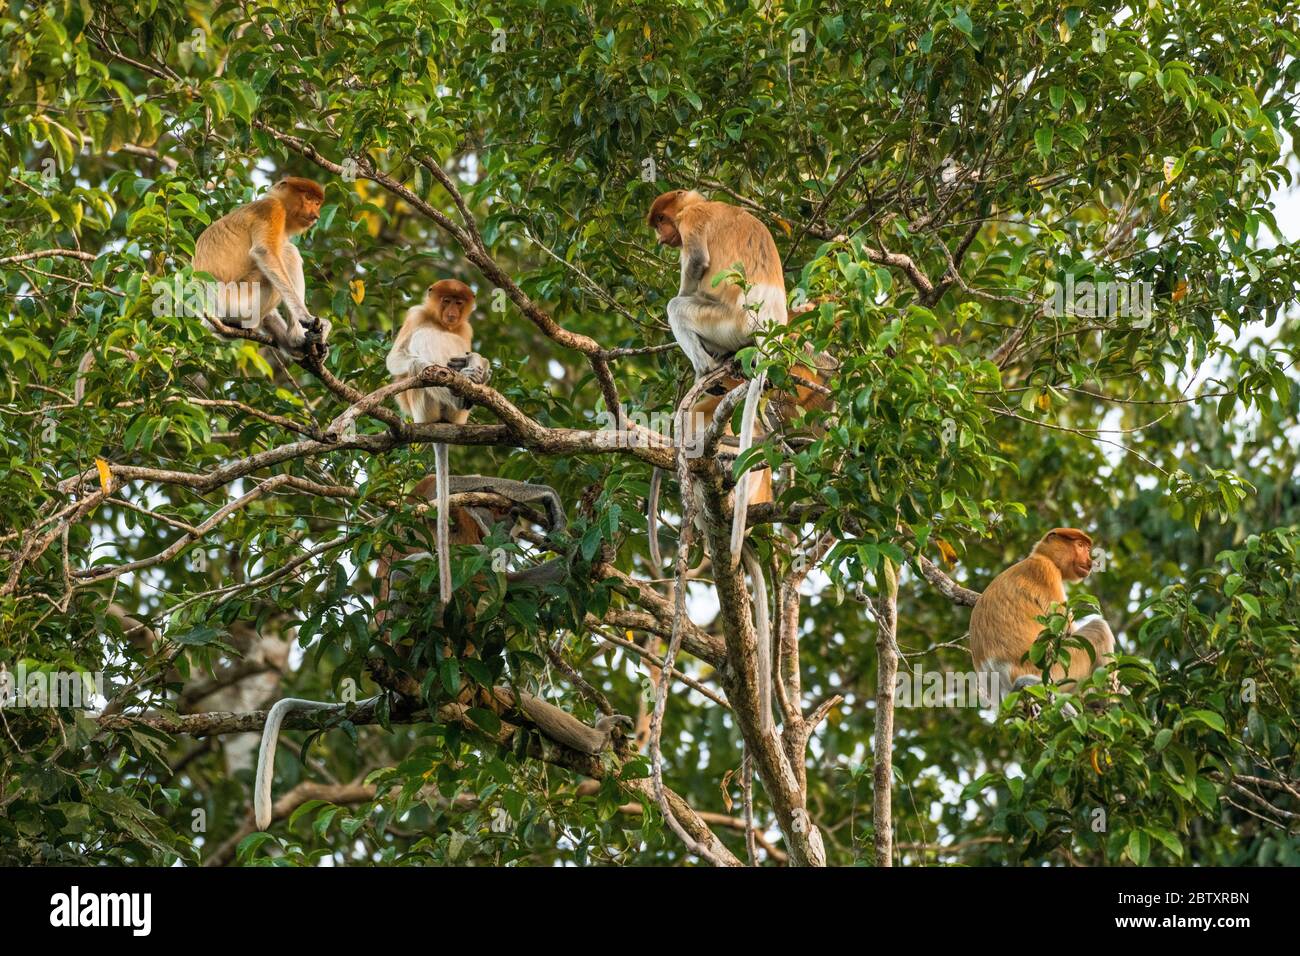 A troop of Proboscis Monkeys in a tree on the banks of the Kinabatangan River, Sabah, Malaysian Borneo. Stock Photo